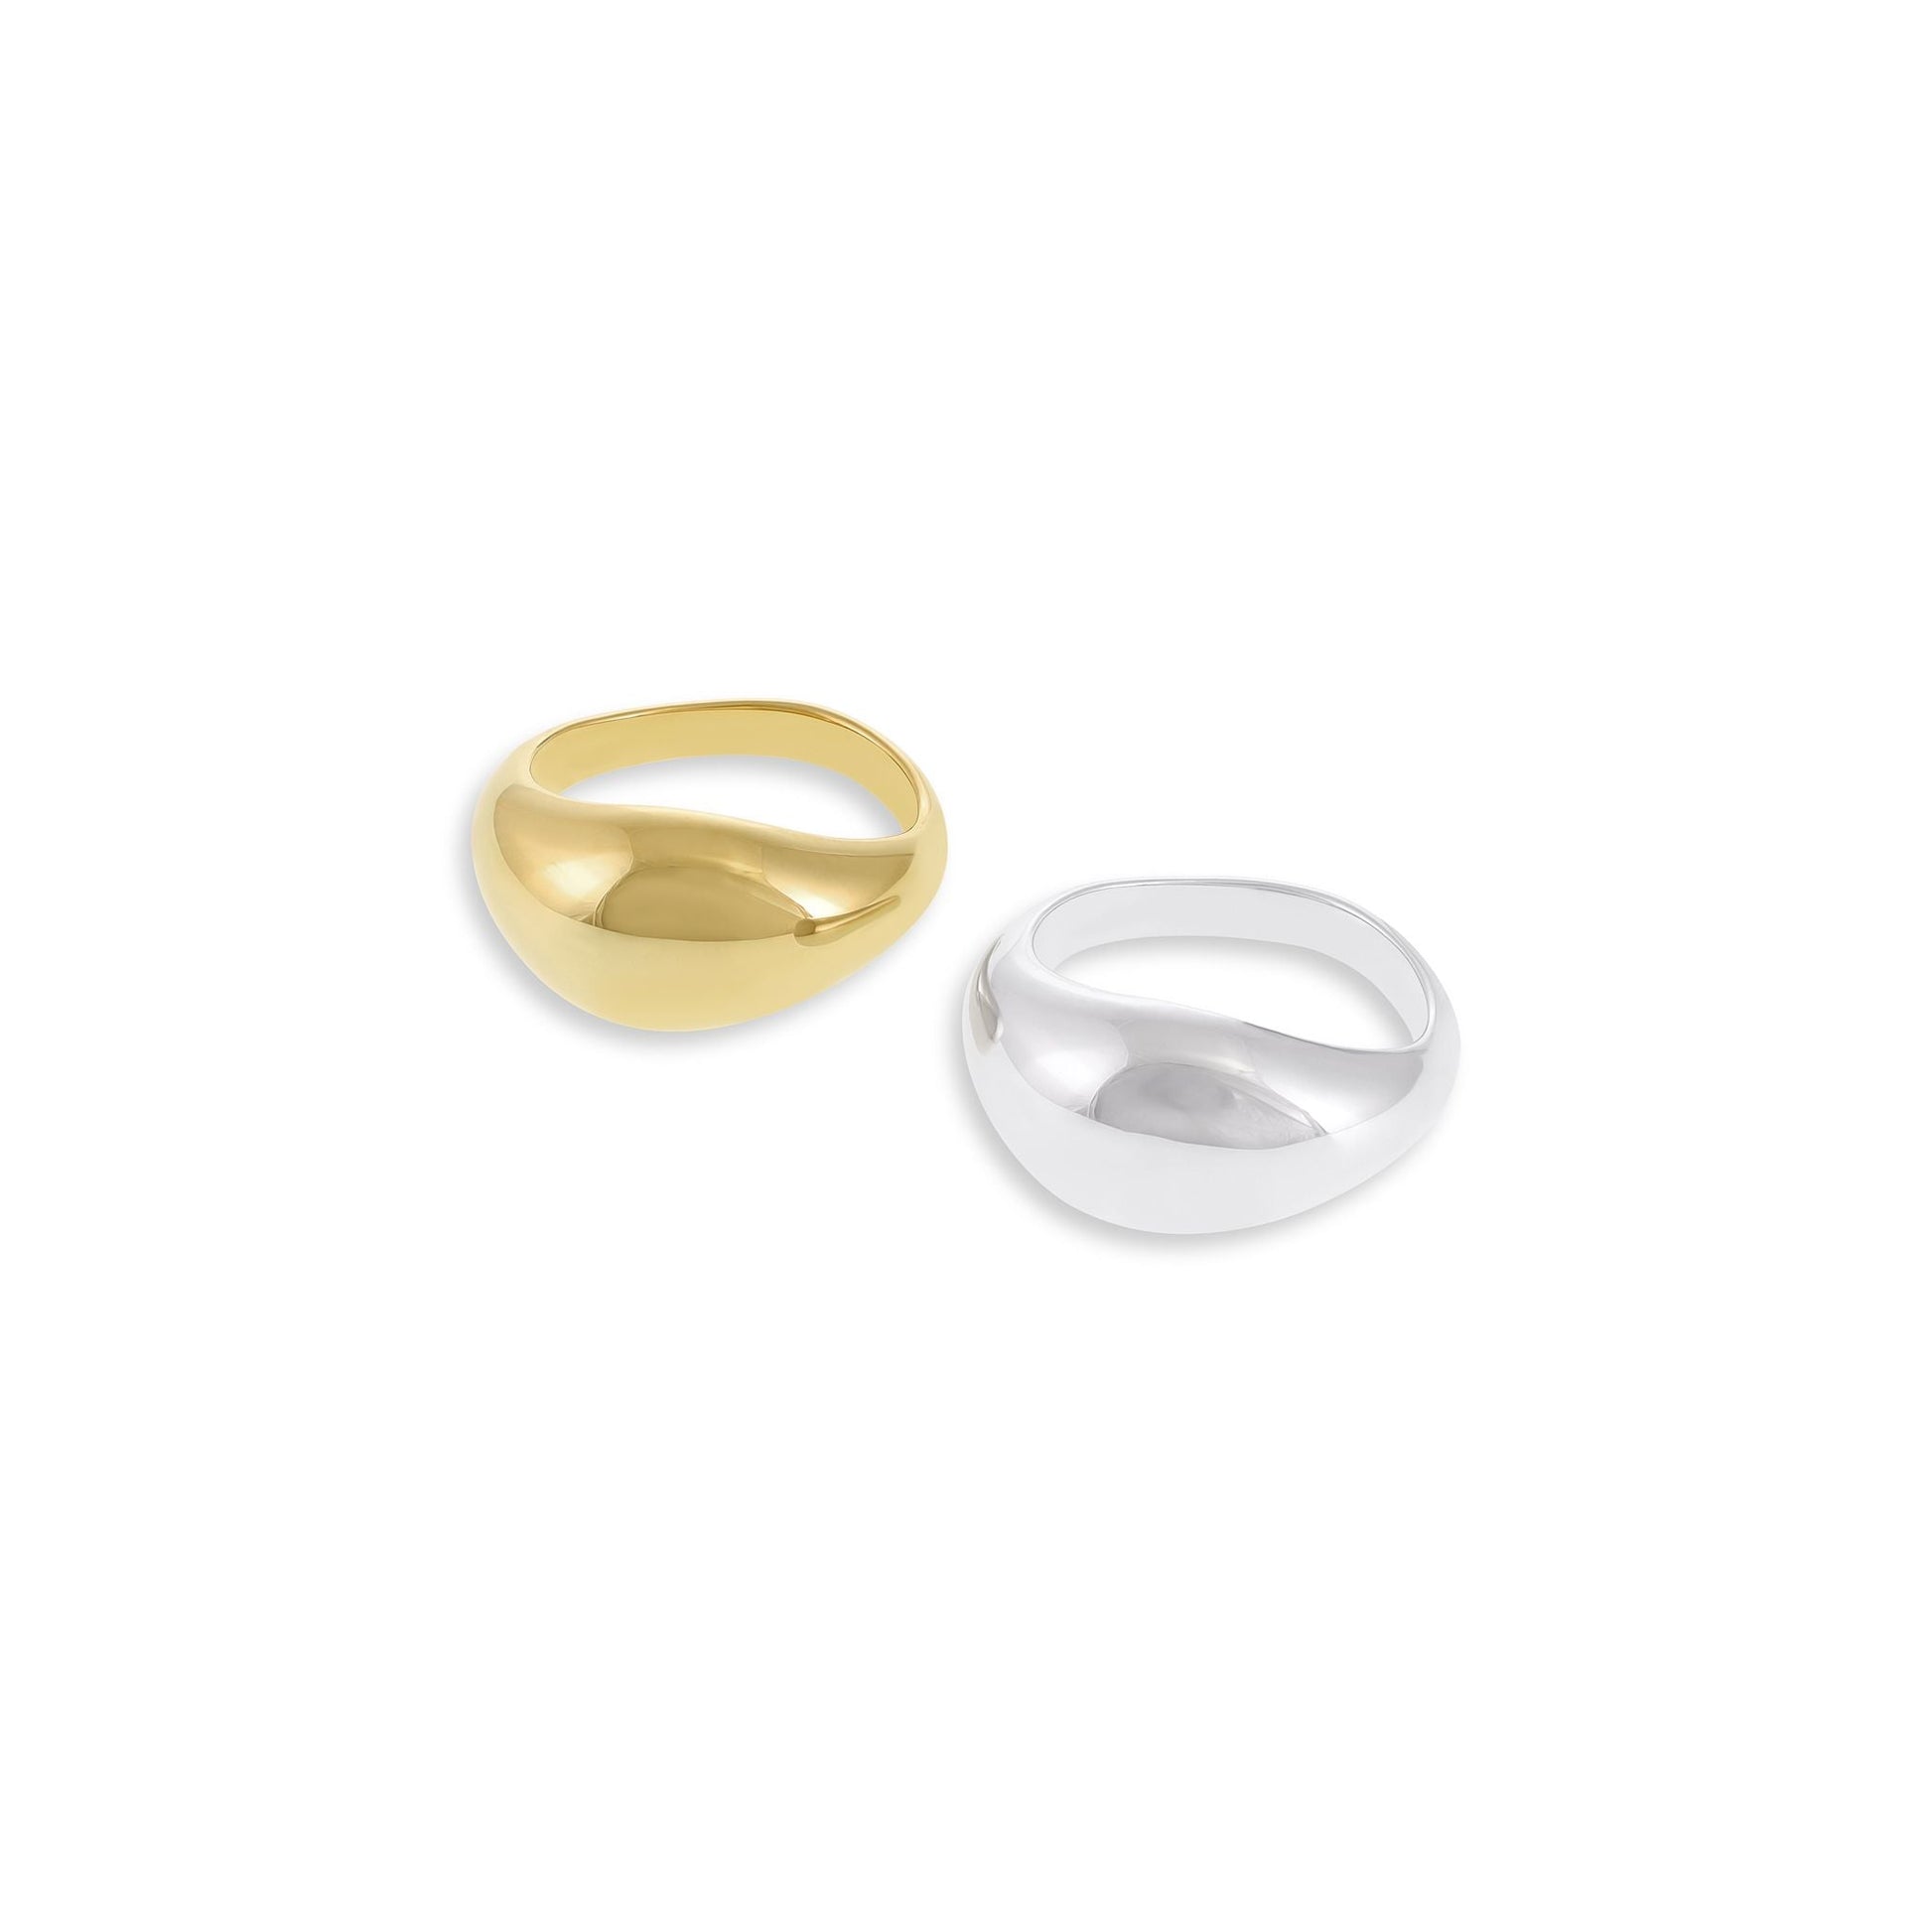 18ct 1 micron gold plated 925 silver fluid ring PRN3001 - FJewellery